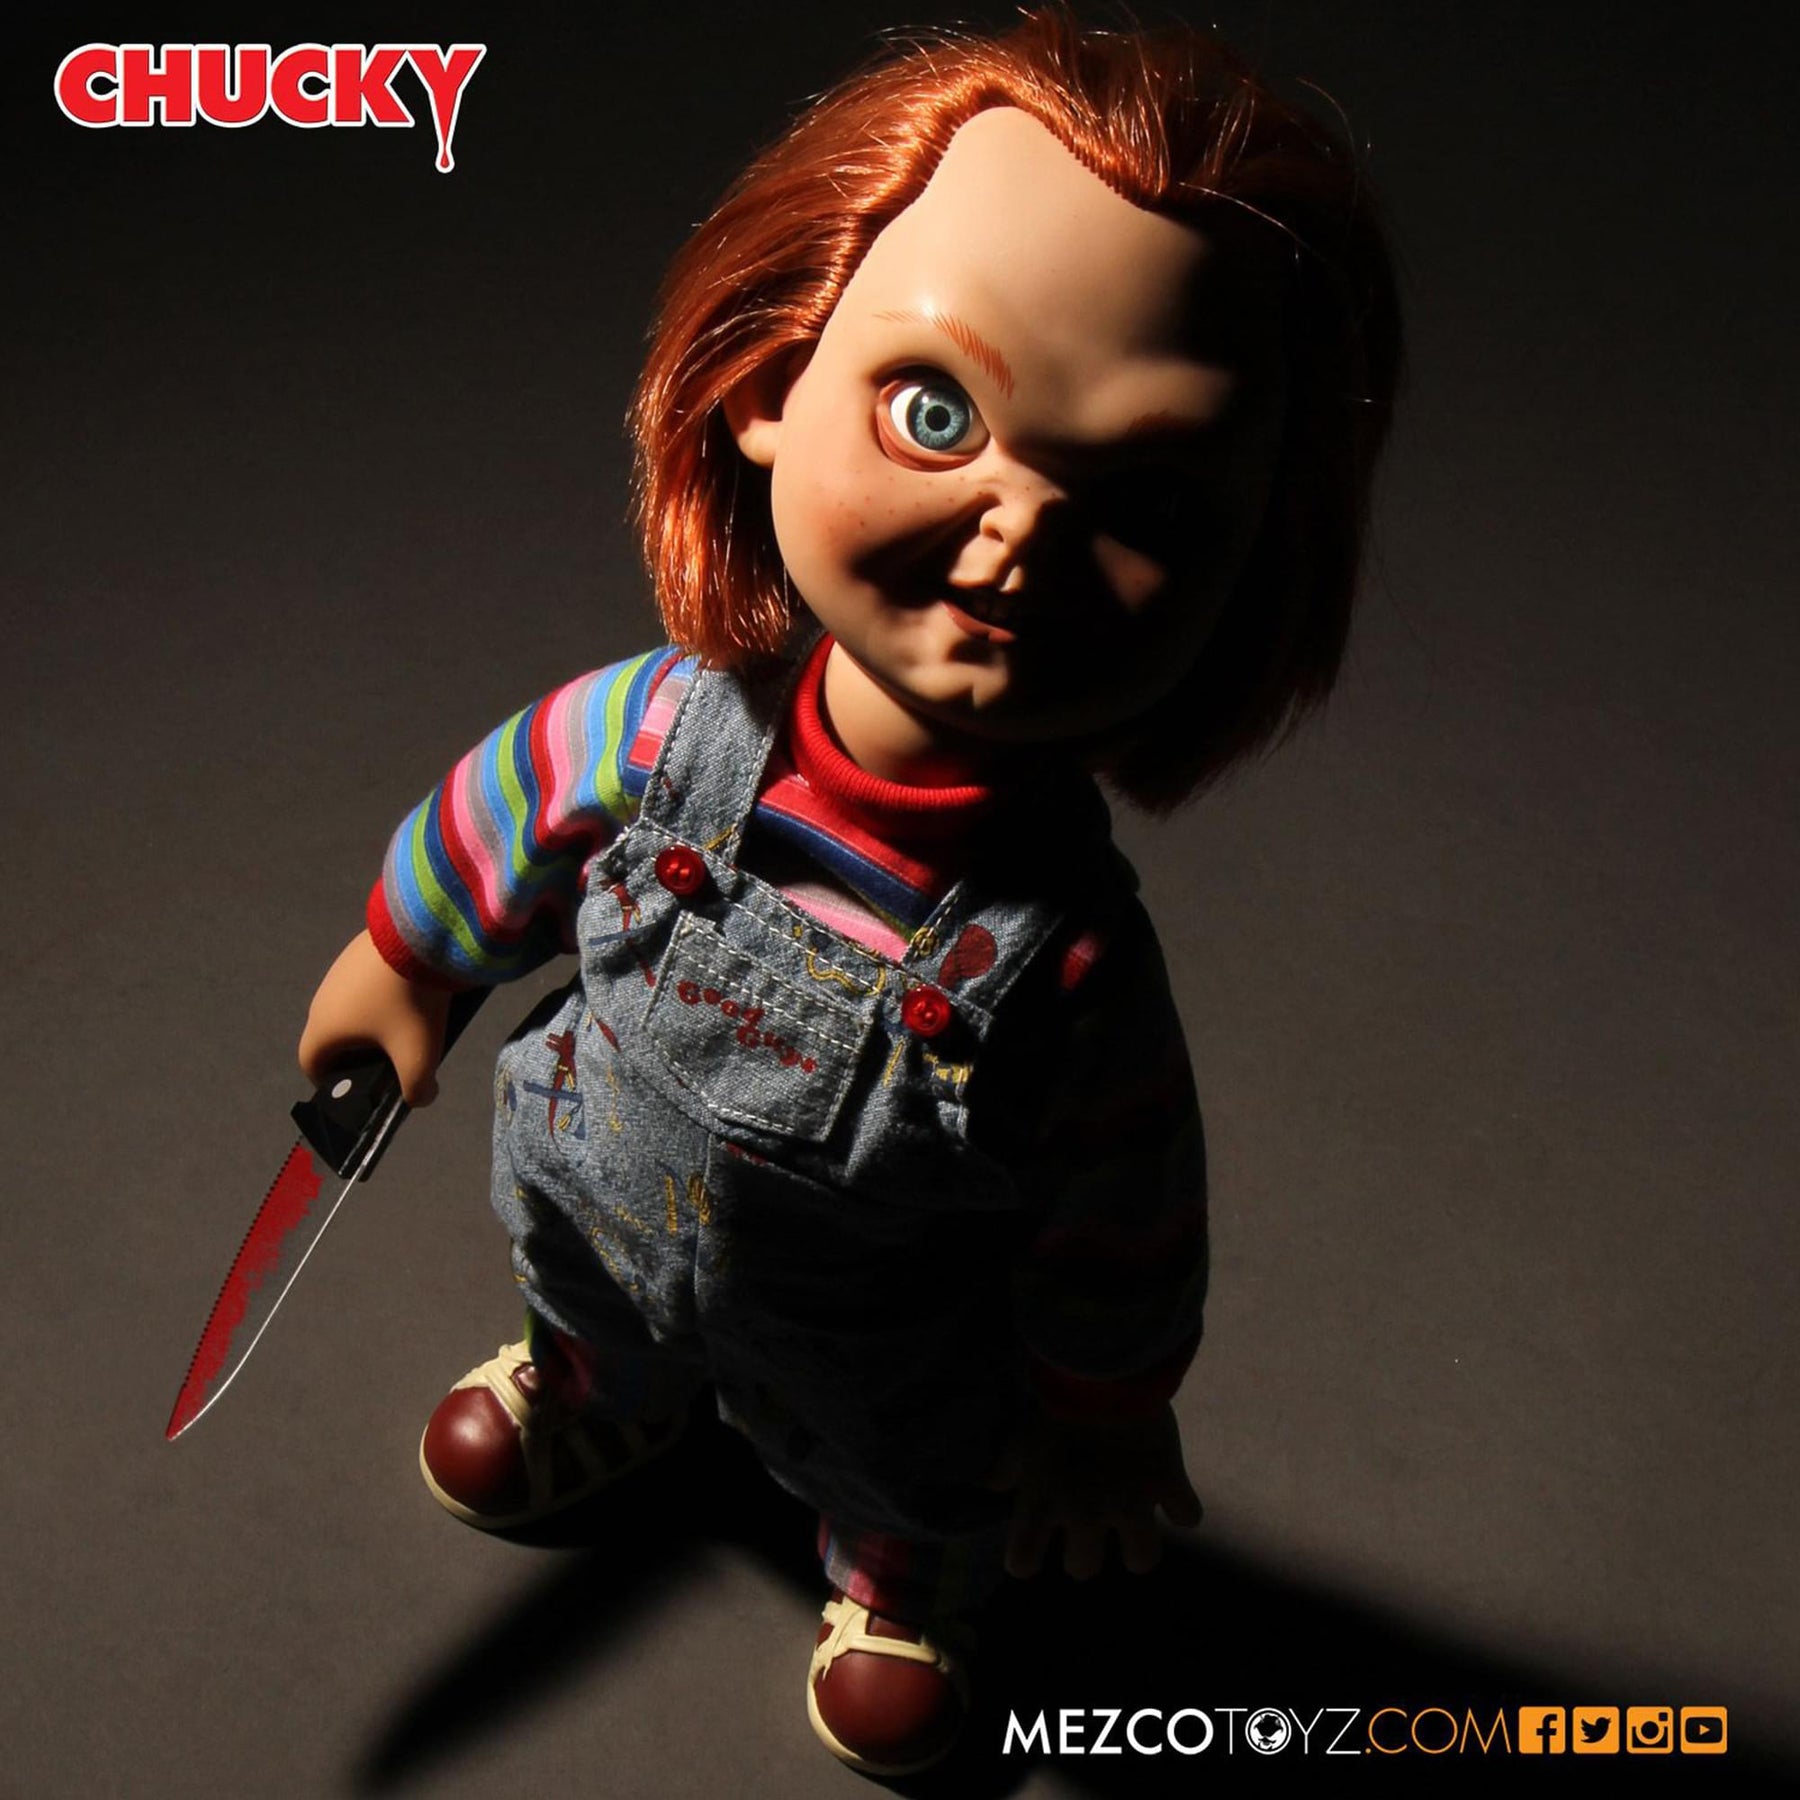 Child's Play 15" Good Guy Chucky Talking Action Figure